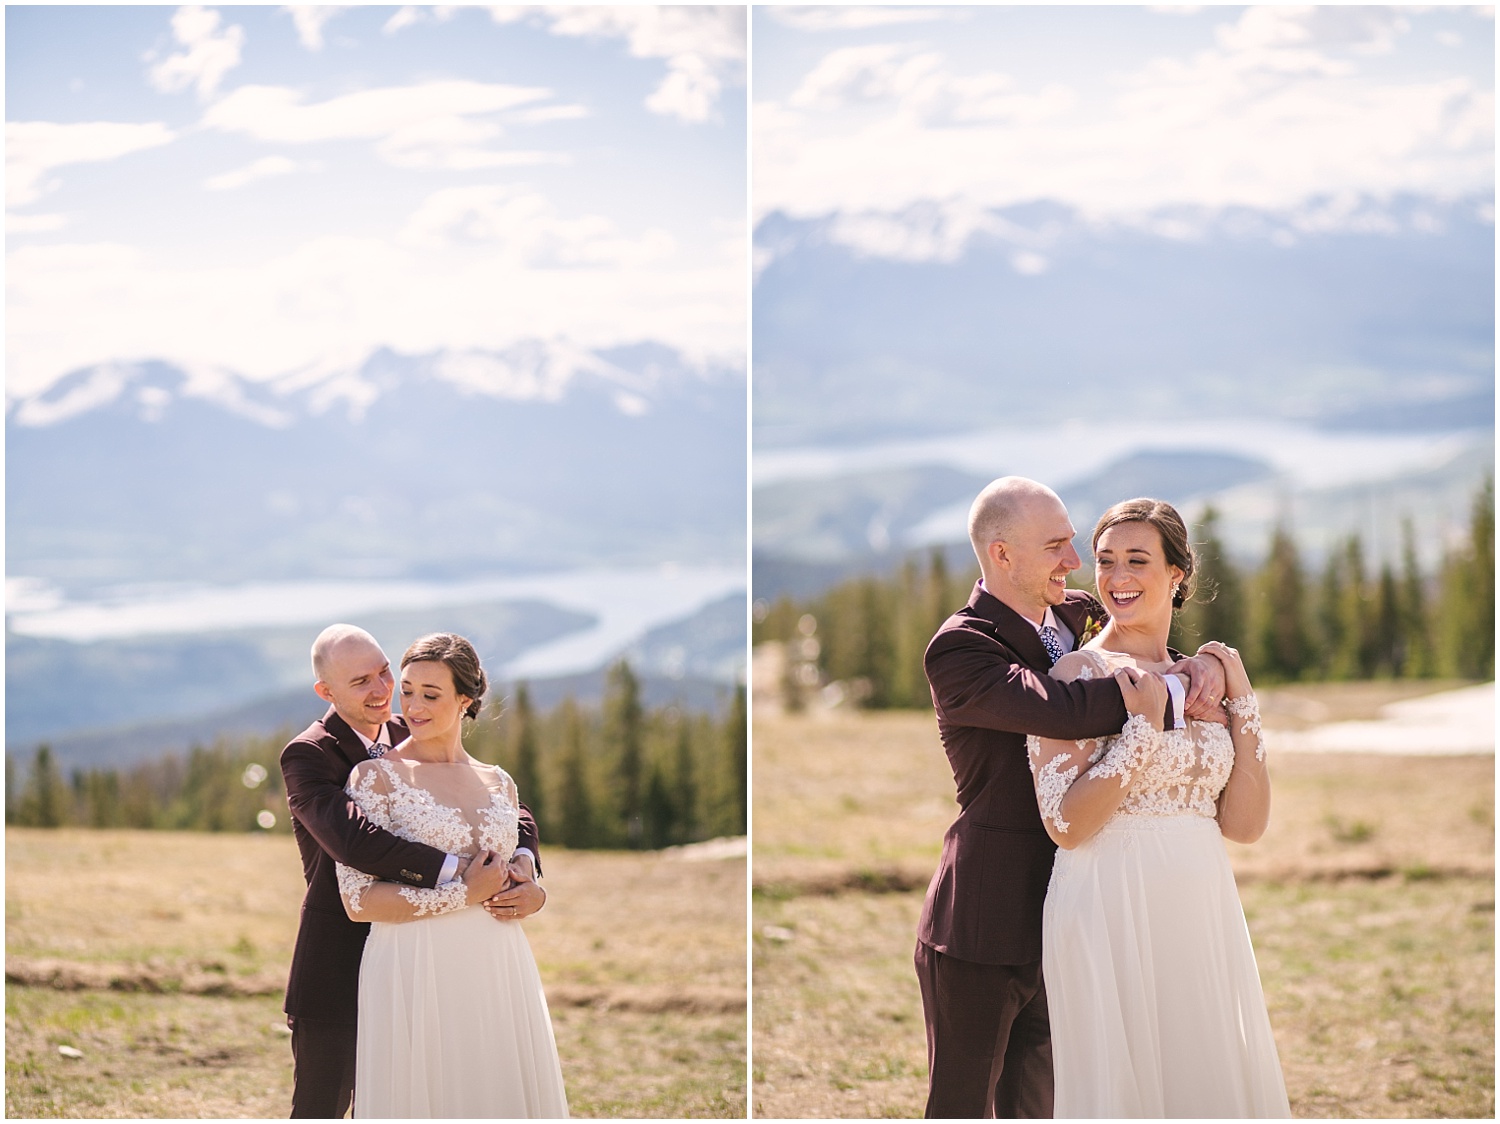 Bride and groom embrace after their wedding ceremony at the summit of Keystone Colorado